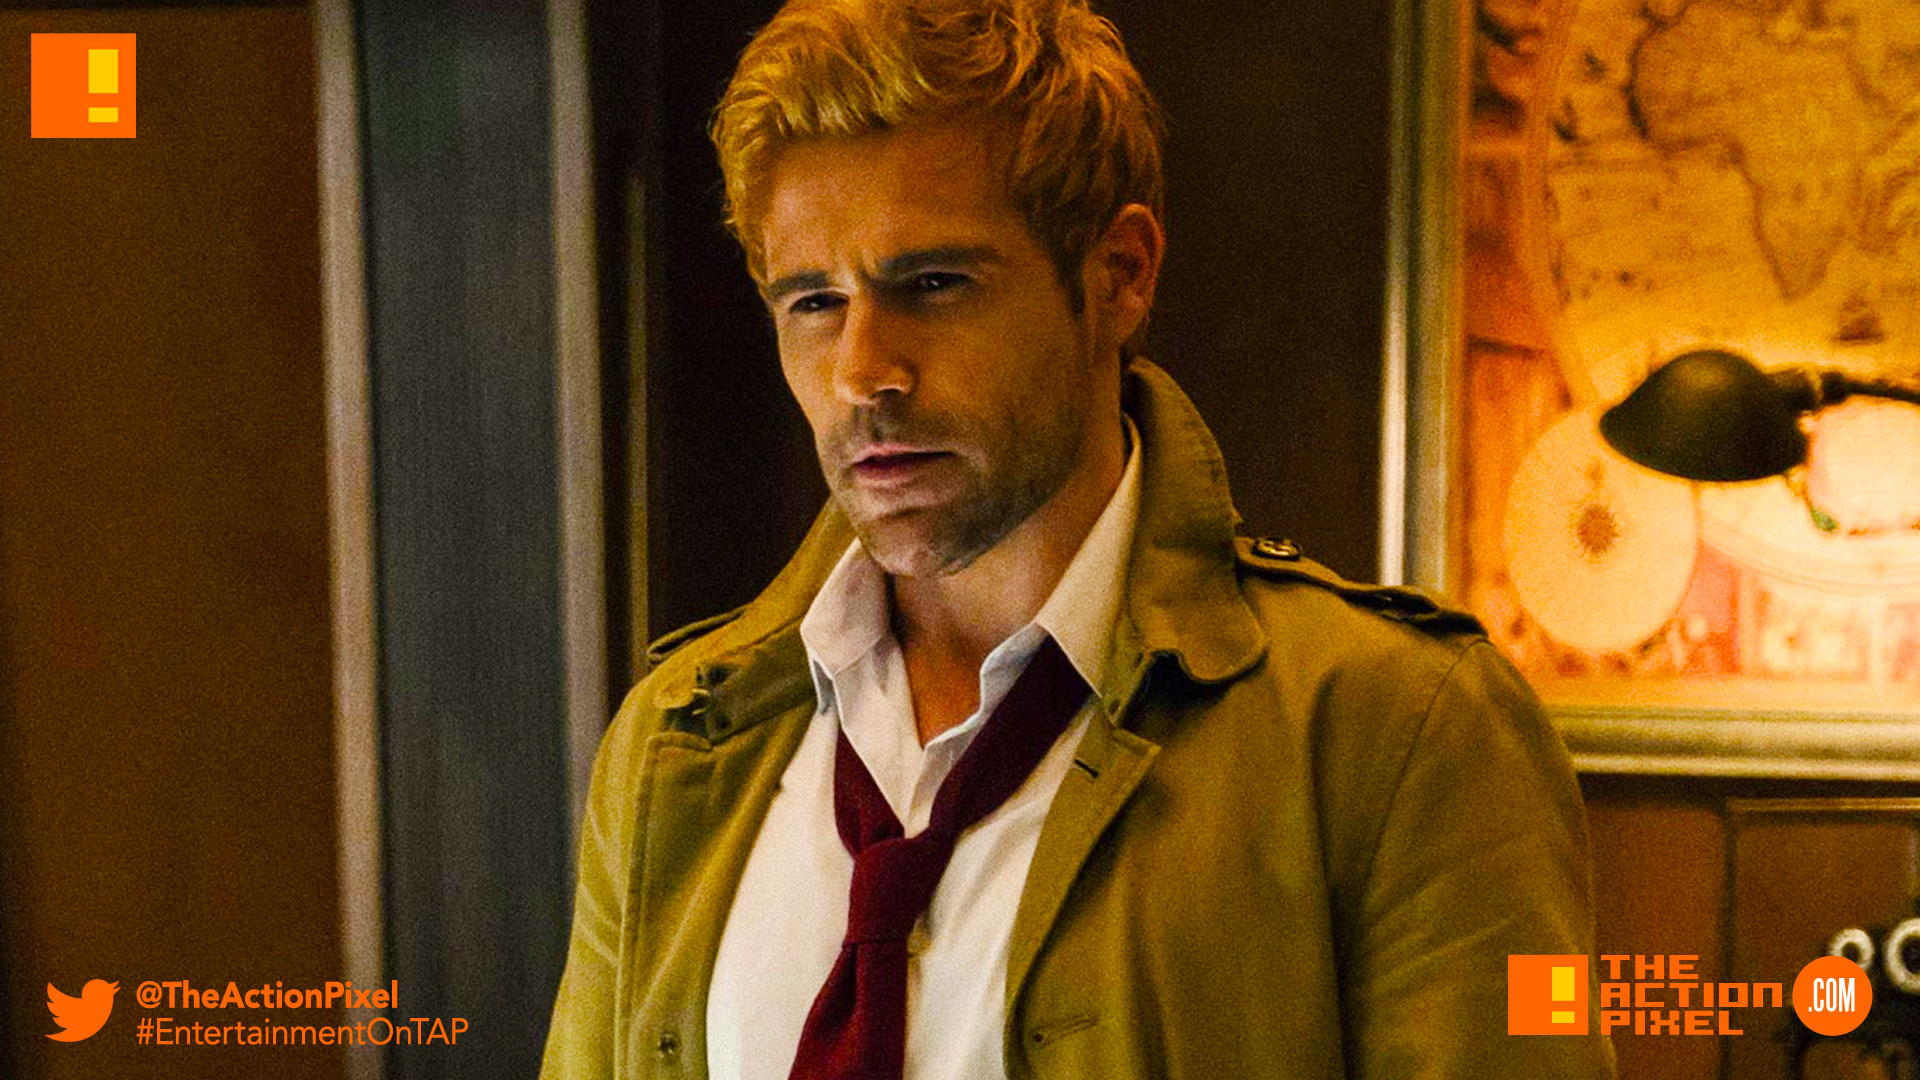 constantine, matt ryan, dc comics, the action pixel, entertainment on tap, daddy darkhest, legends of tomorrow, the cw network, the cw,